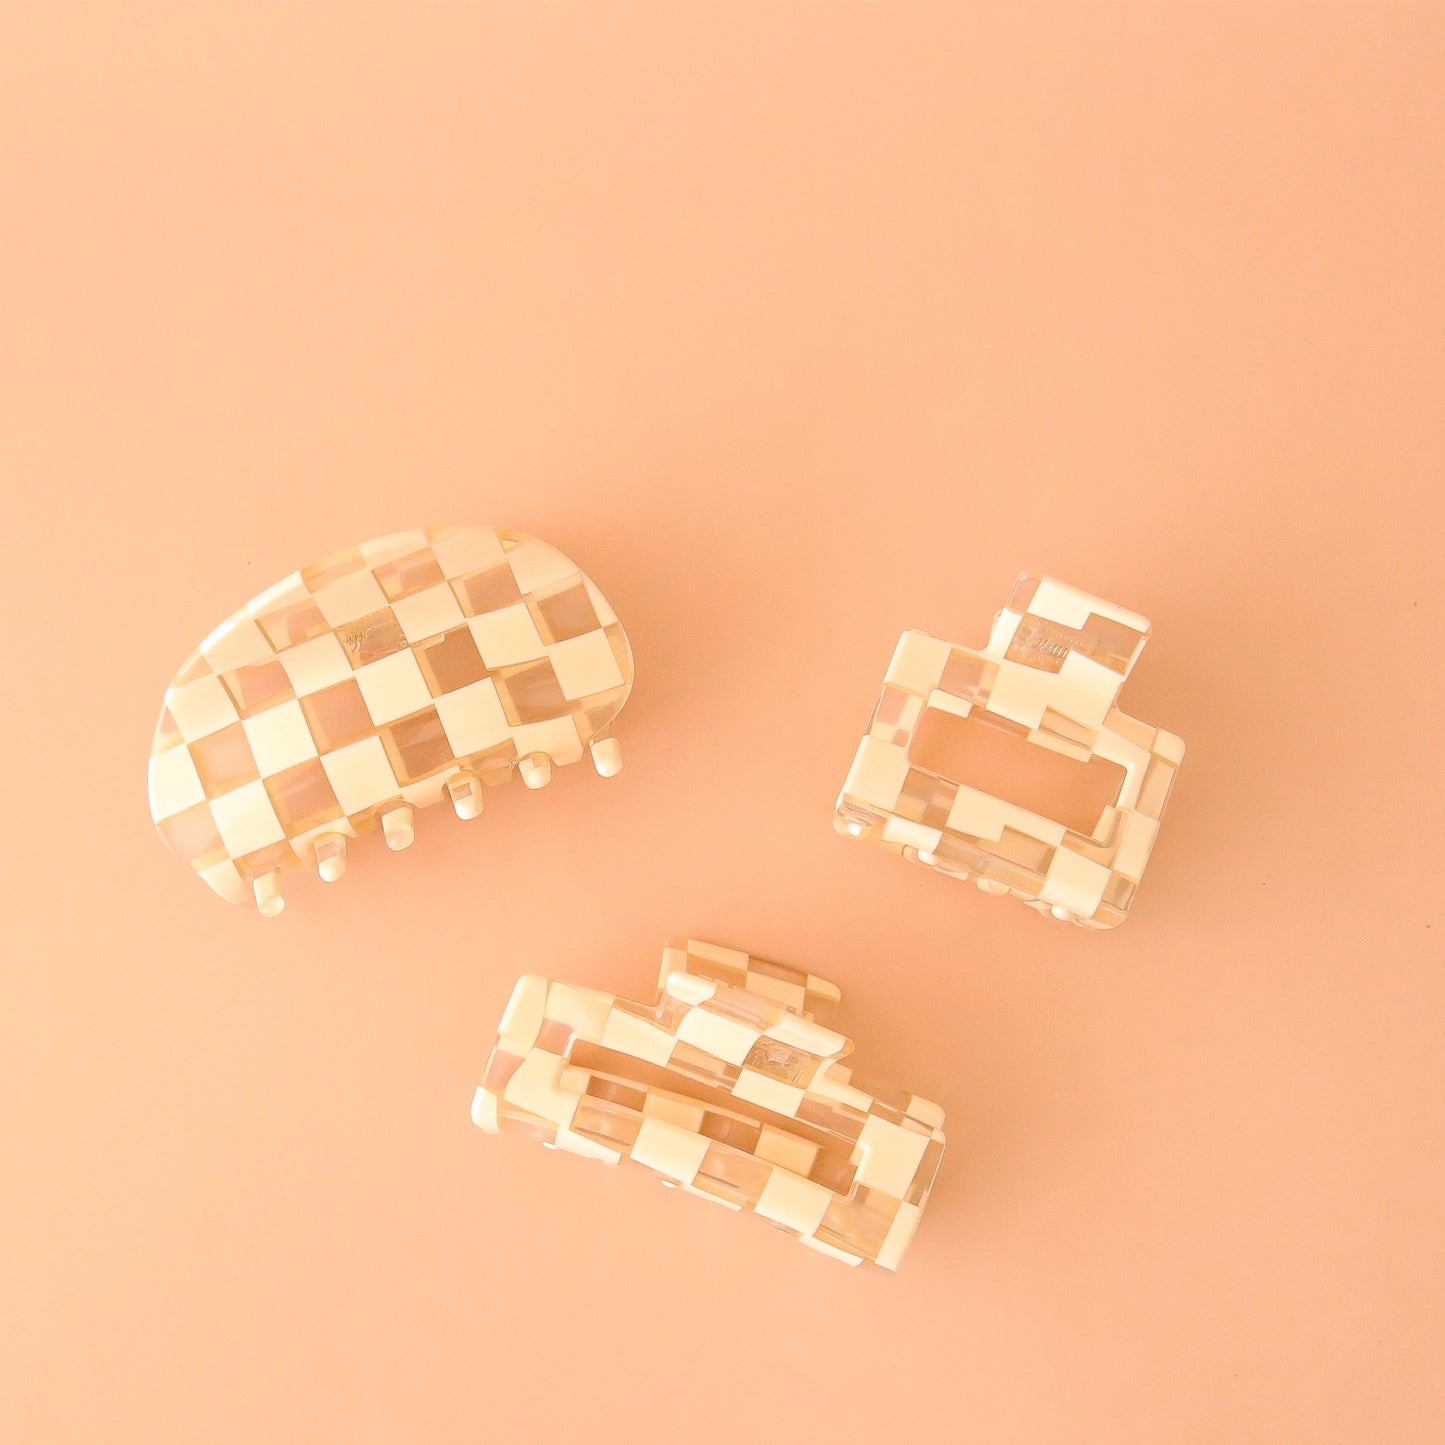 On a peachy background is three different shaped white claw clips. One with a rounded edge, one smaller square shape and one large rectangular shape. 